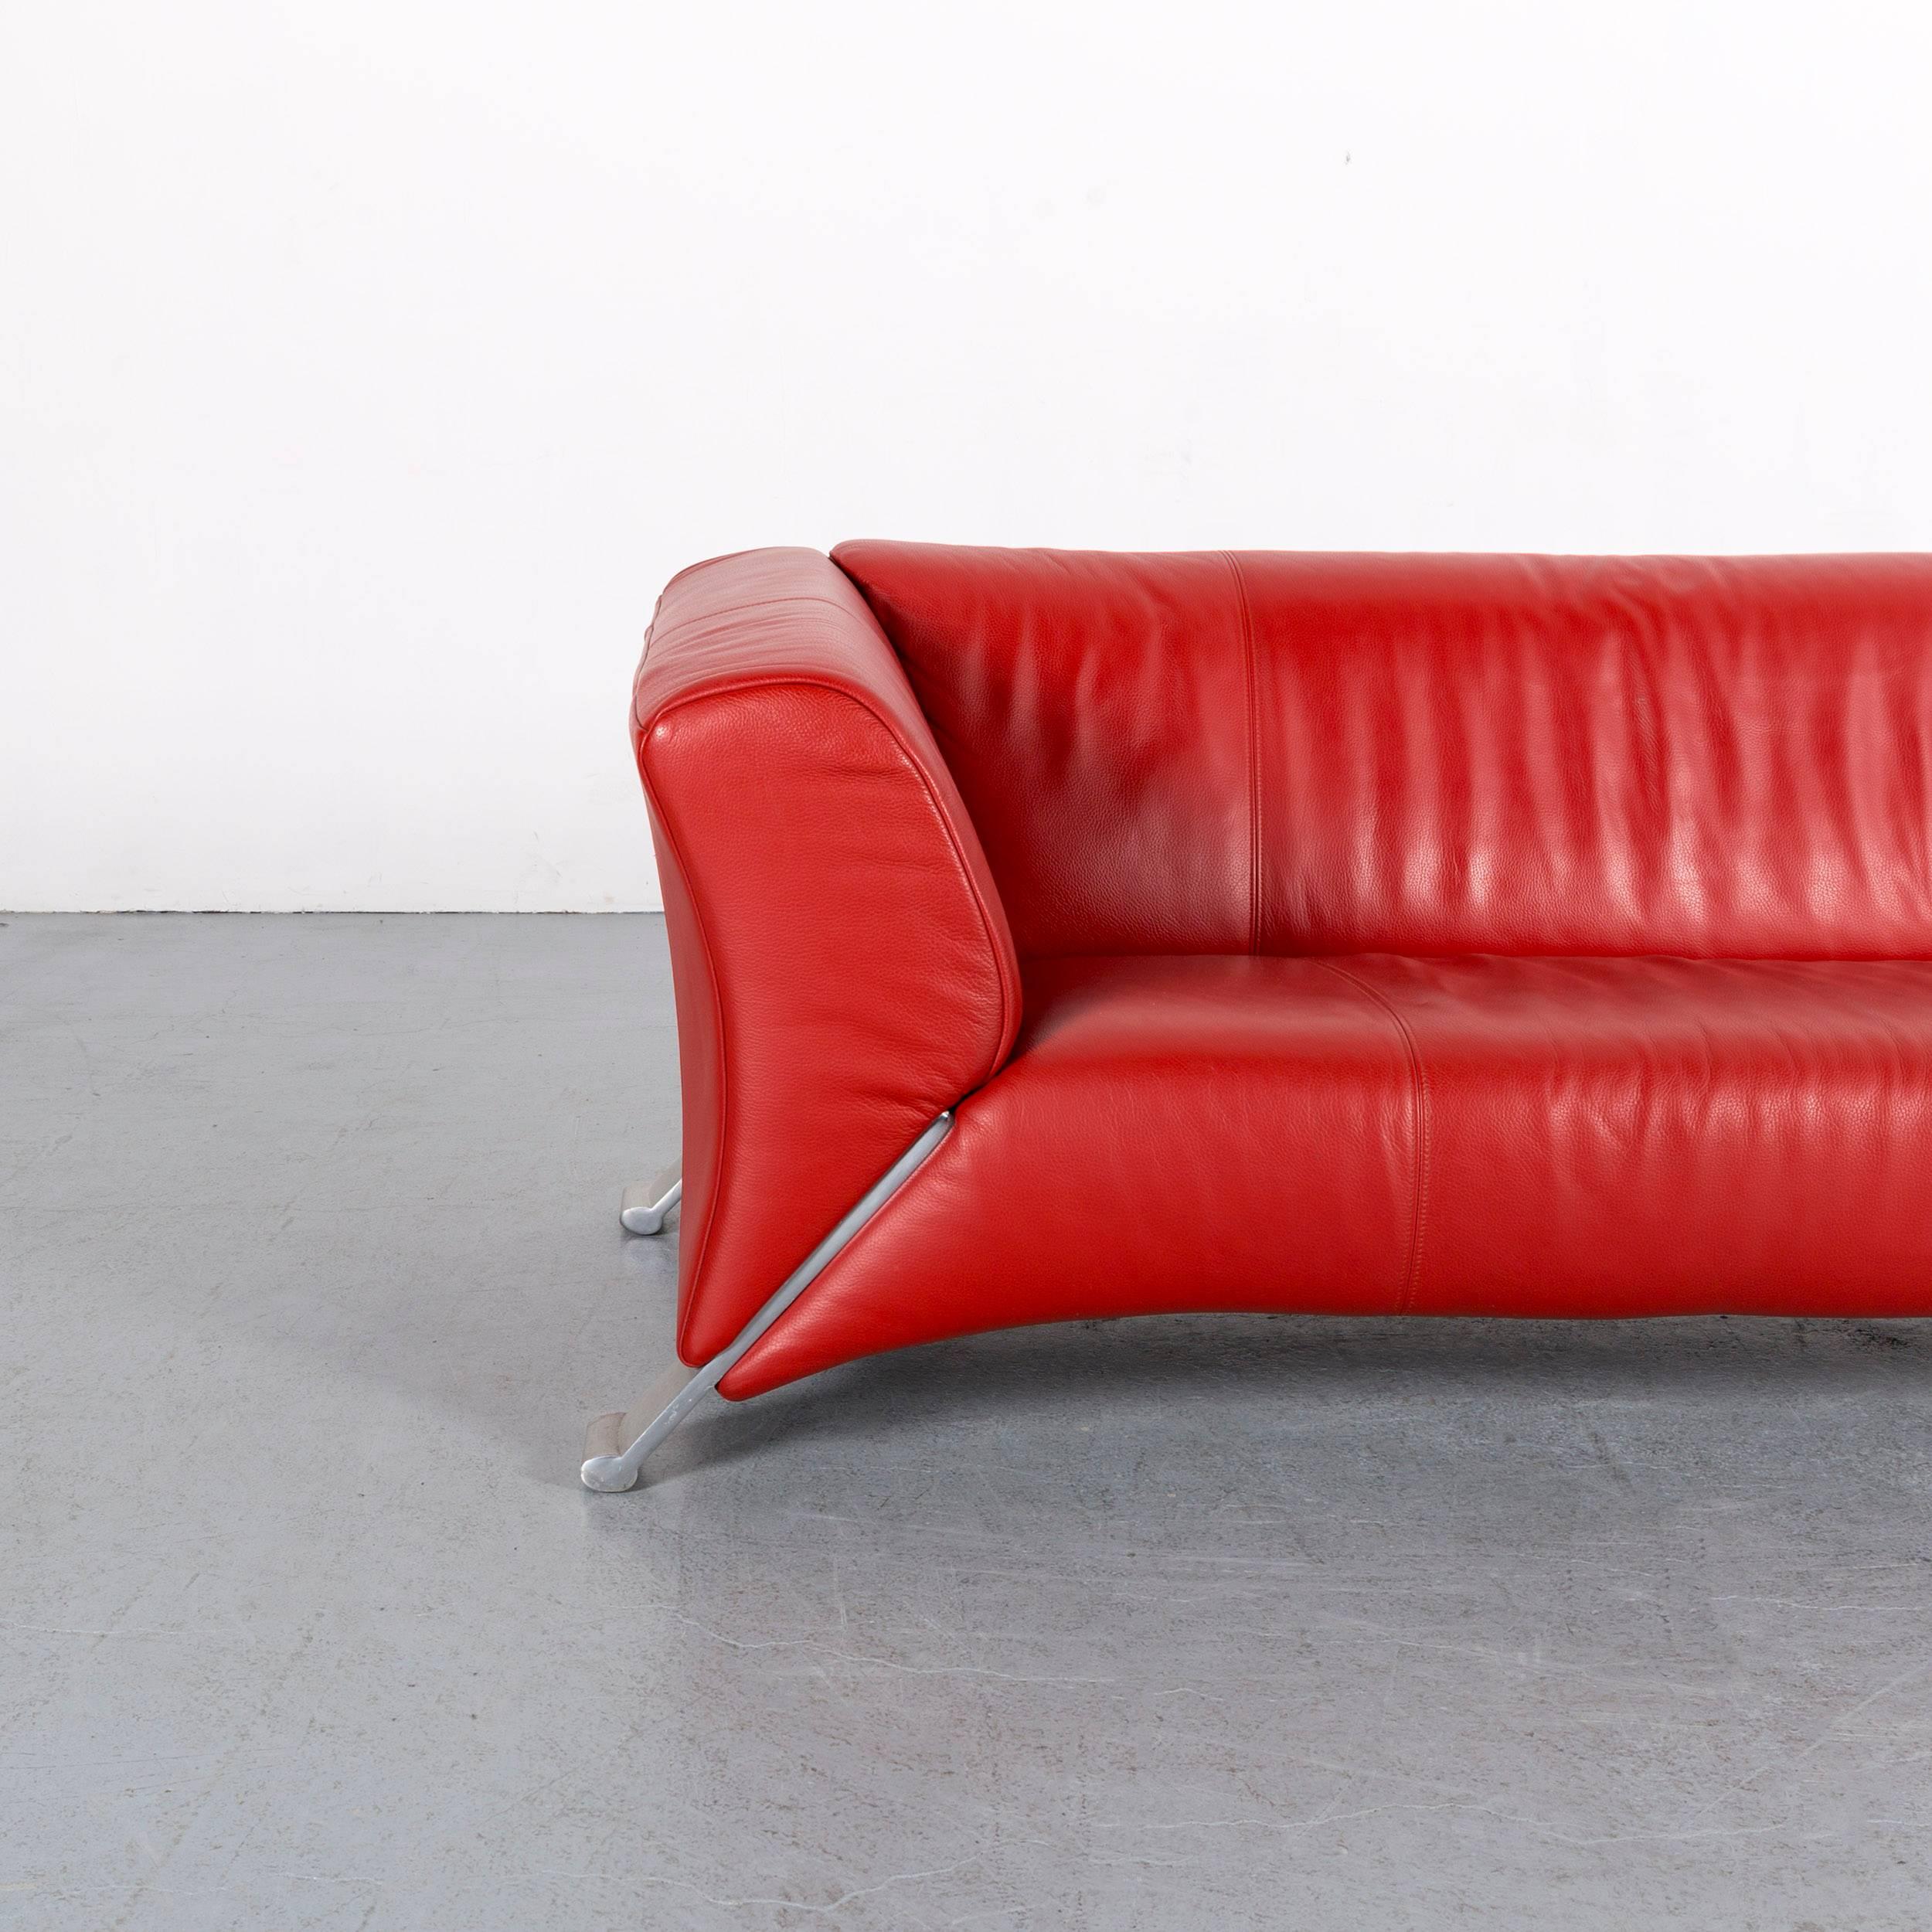 We bring to you an Rolf Benz 322 designer sofa red three-seat leather modern couch metal feet.